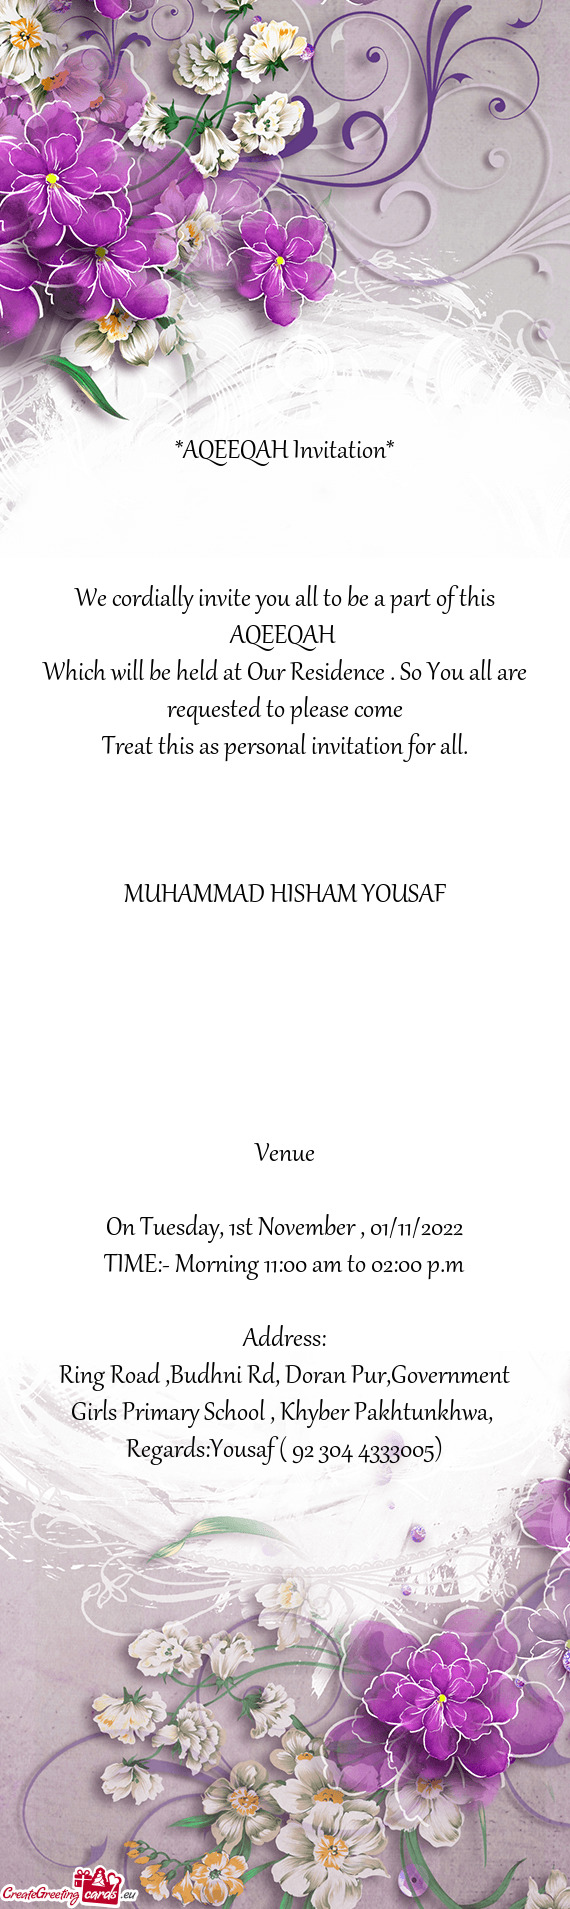 We cordially invite you all to be a part of this AQEEQAH